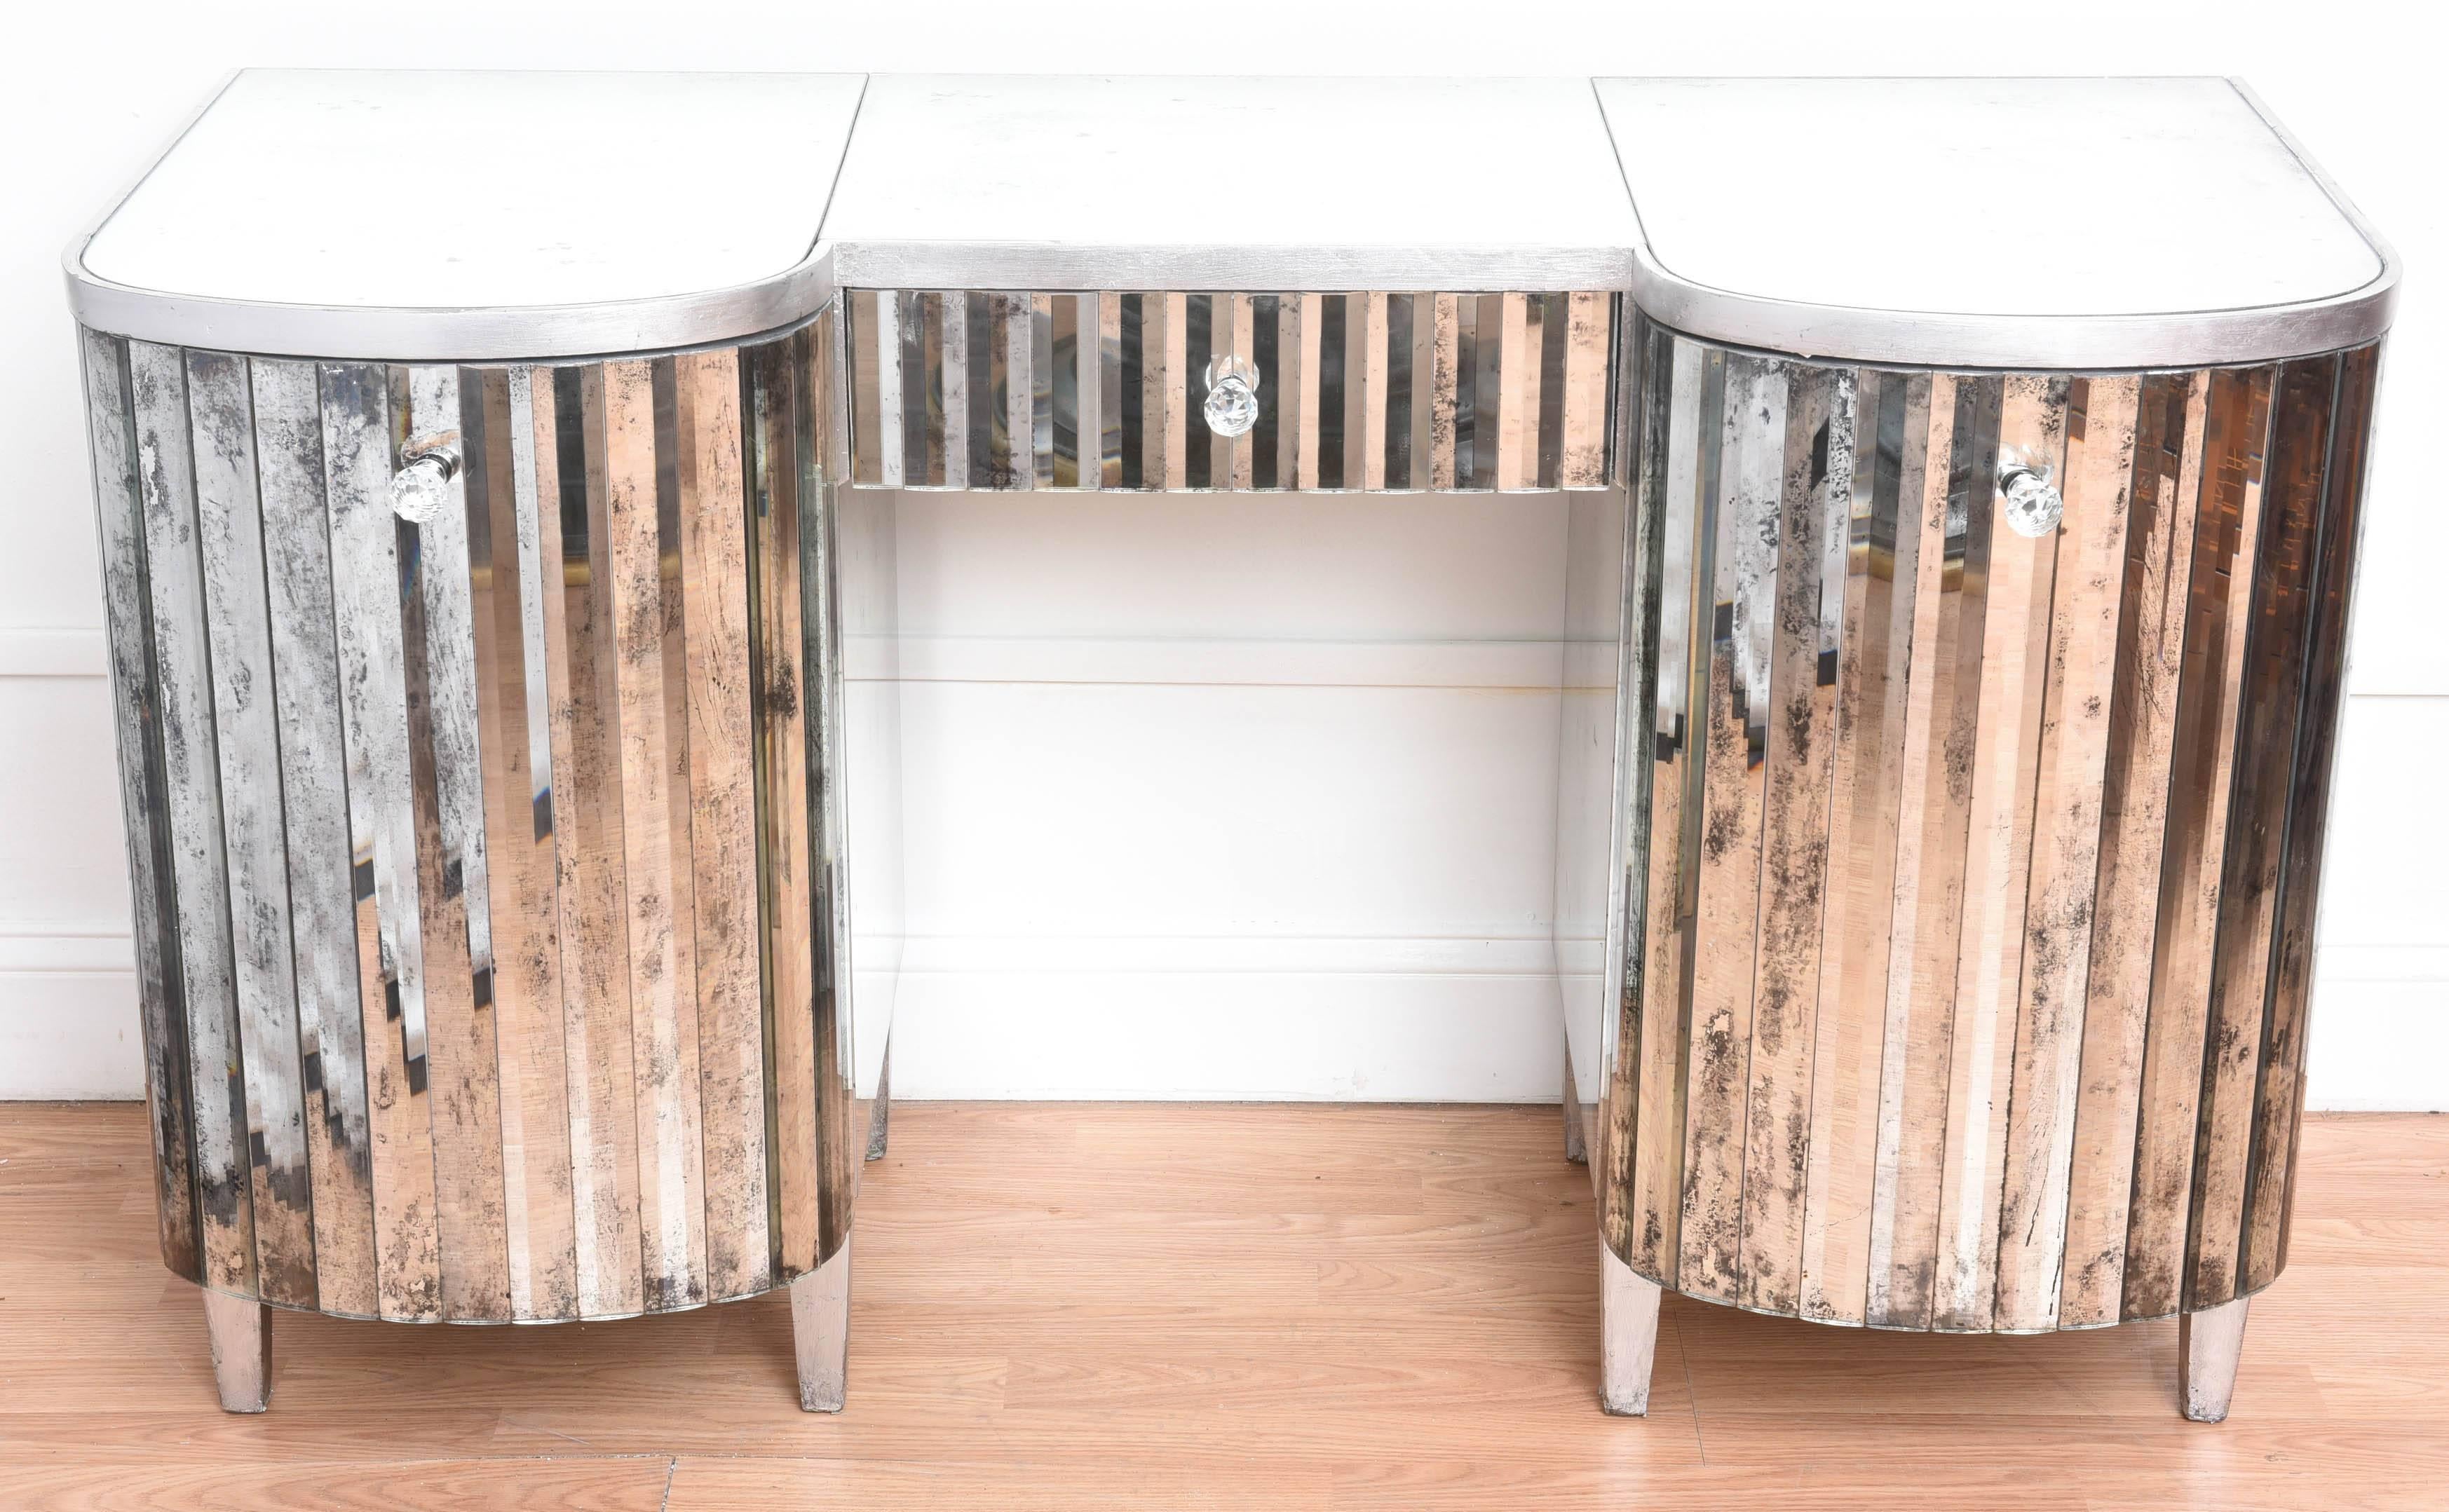 1940's talian mirror dressing table with nine drawers, old mirrors. Silver trim and interior painted.